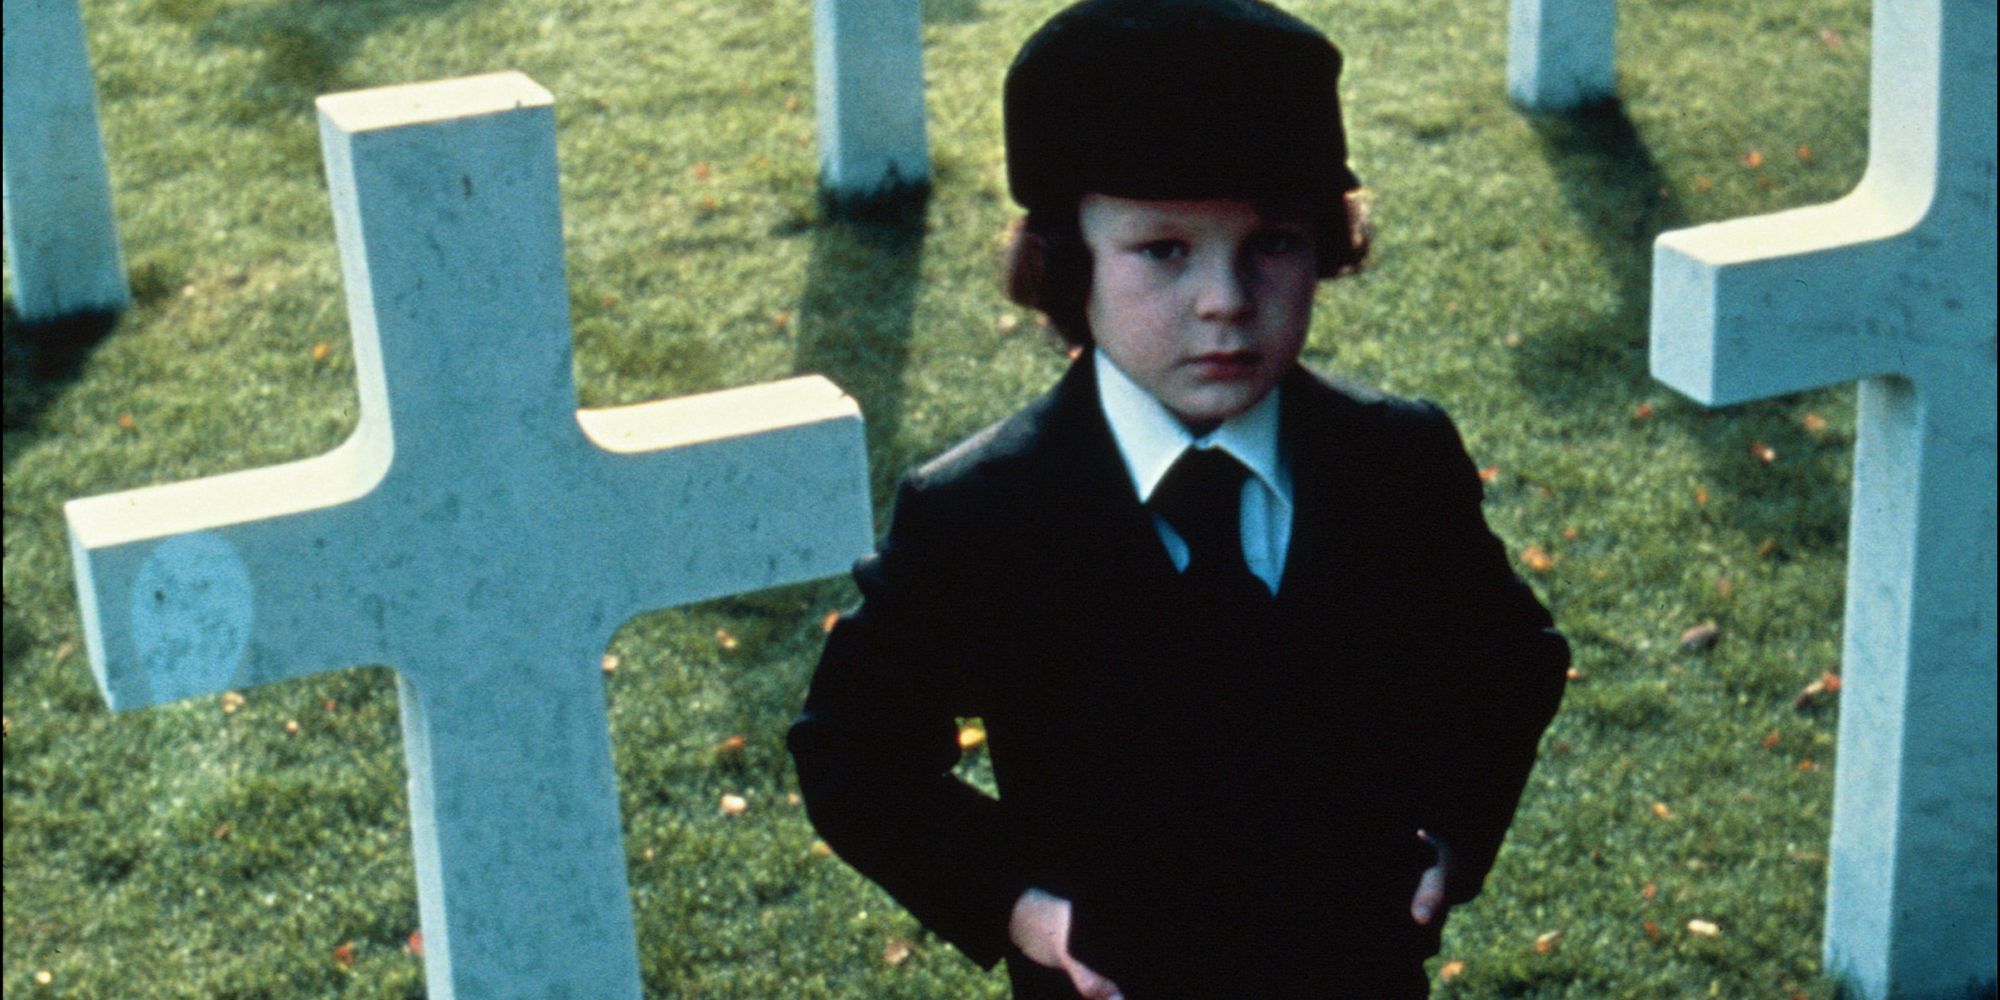 A young boy standing among gravestones